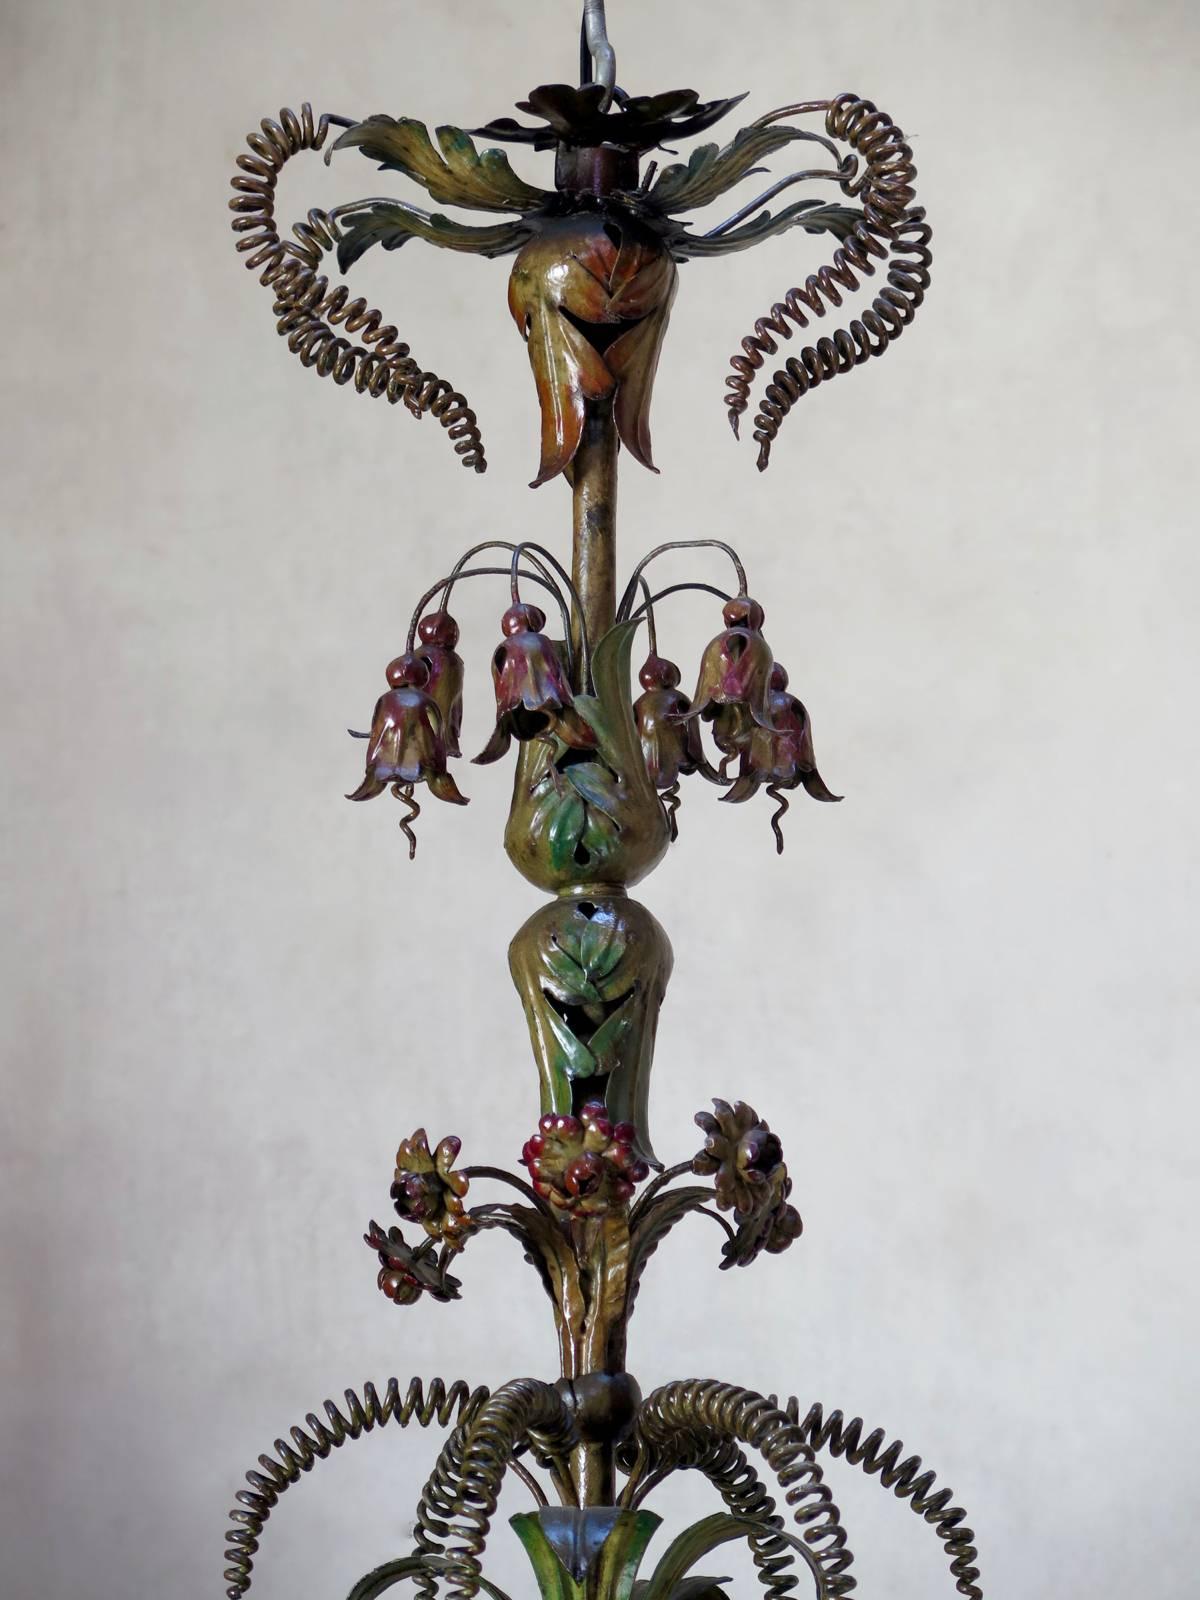 Very lovely and rare large polycromed iron chandelier, in delightful muted greens, yellows and reds. Lavishly adorned with delicately-fashioned iron flowers.